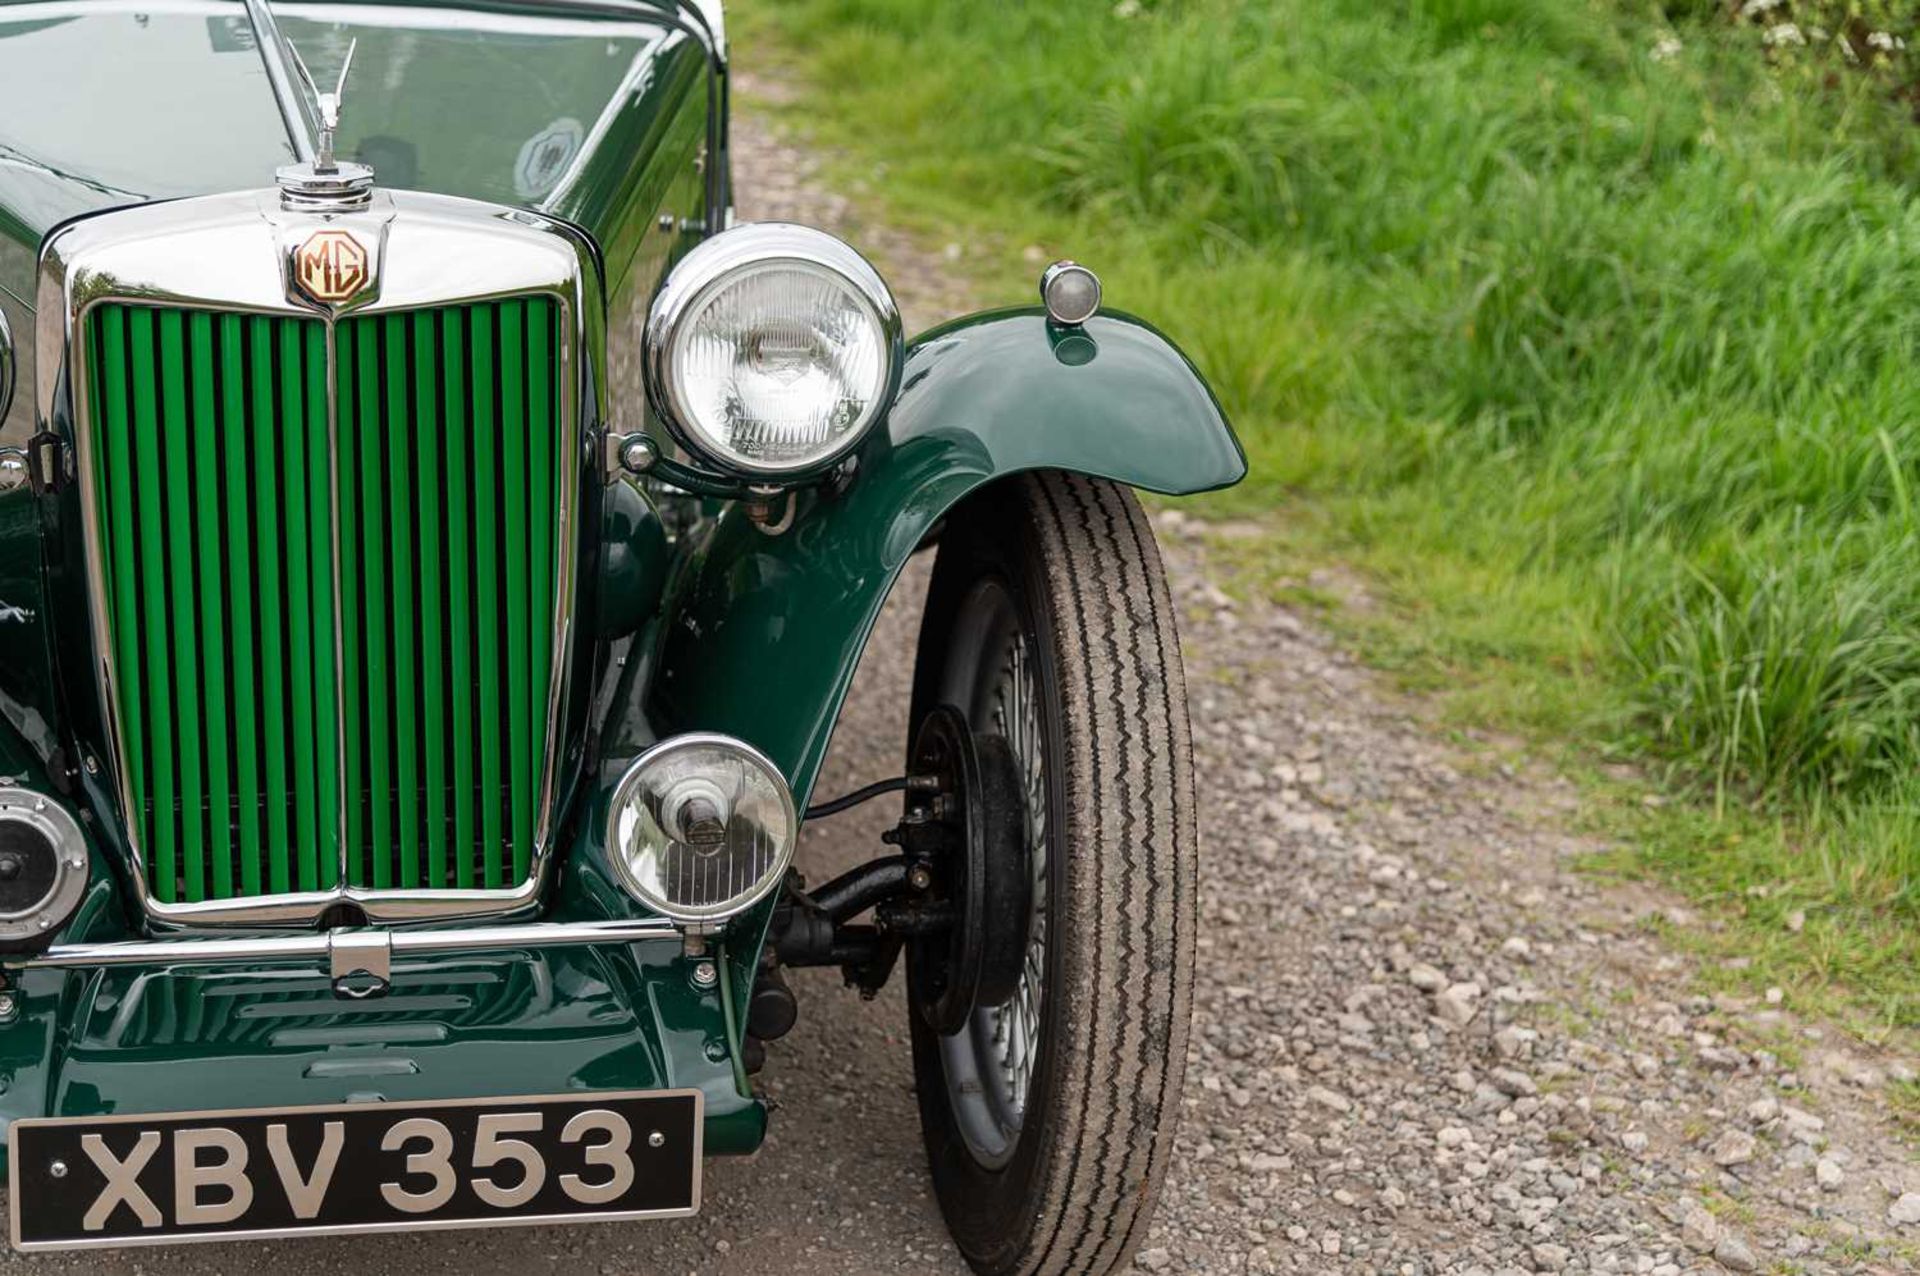 1947 MG TC Midget  Fully restored, right-hand-drive UK home market example - Image 27 of 76